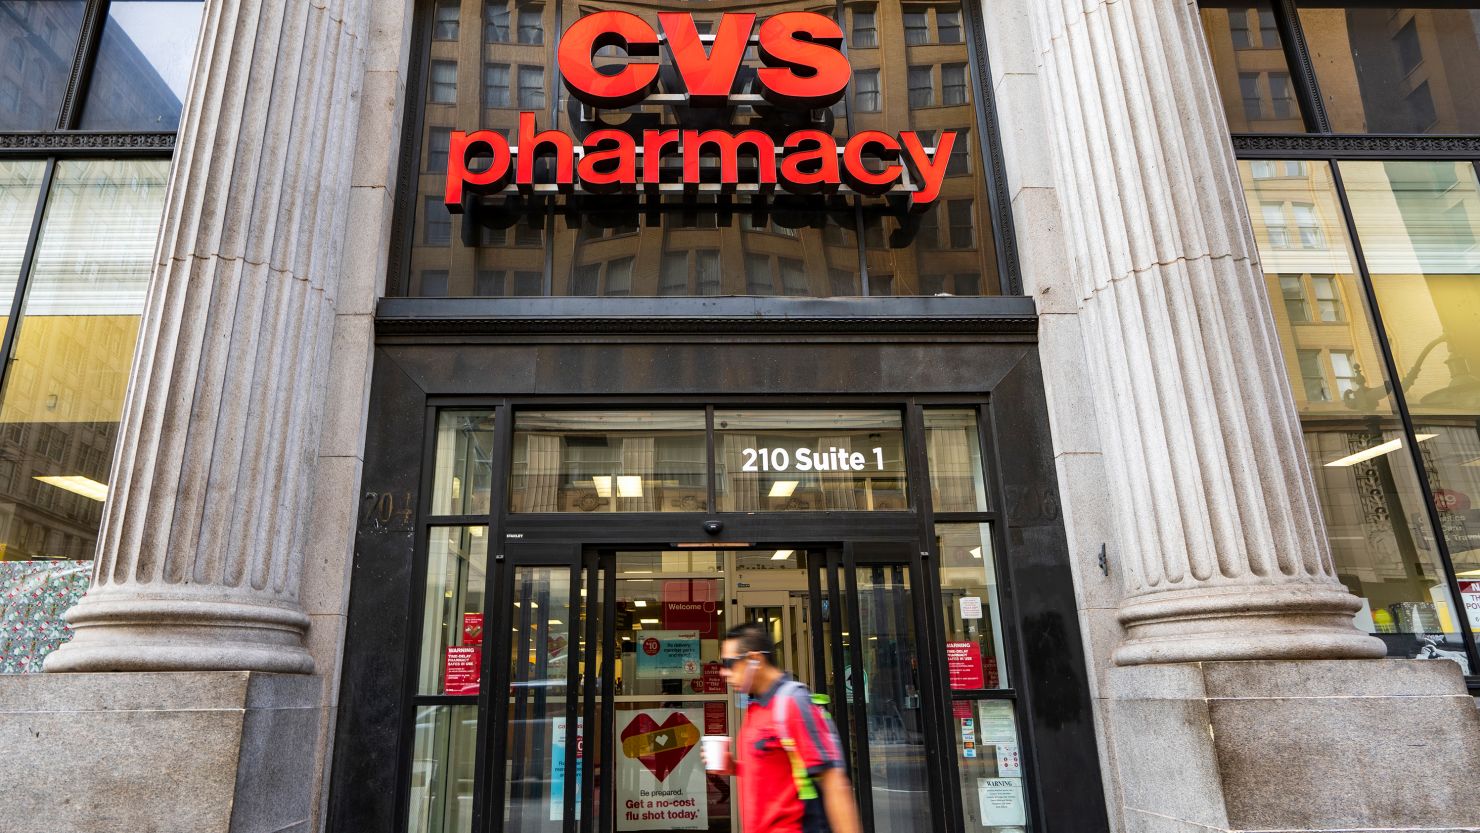 A pedestrian walks past a CVS Pharmacy in Los Angeles. (Photo credit should read Ronen Tivony / Echoes Wire / Barcroft Media via Getty Images)